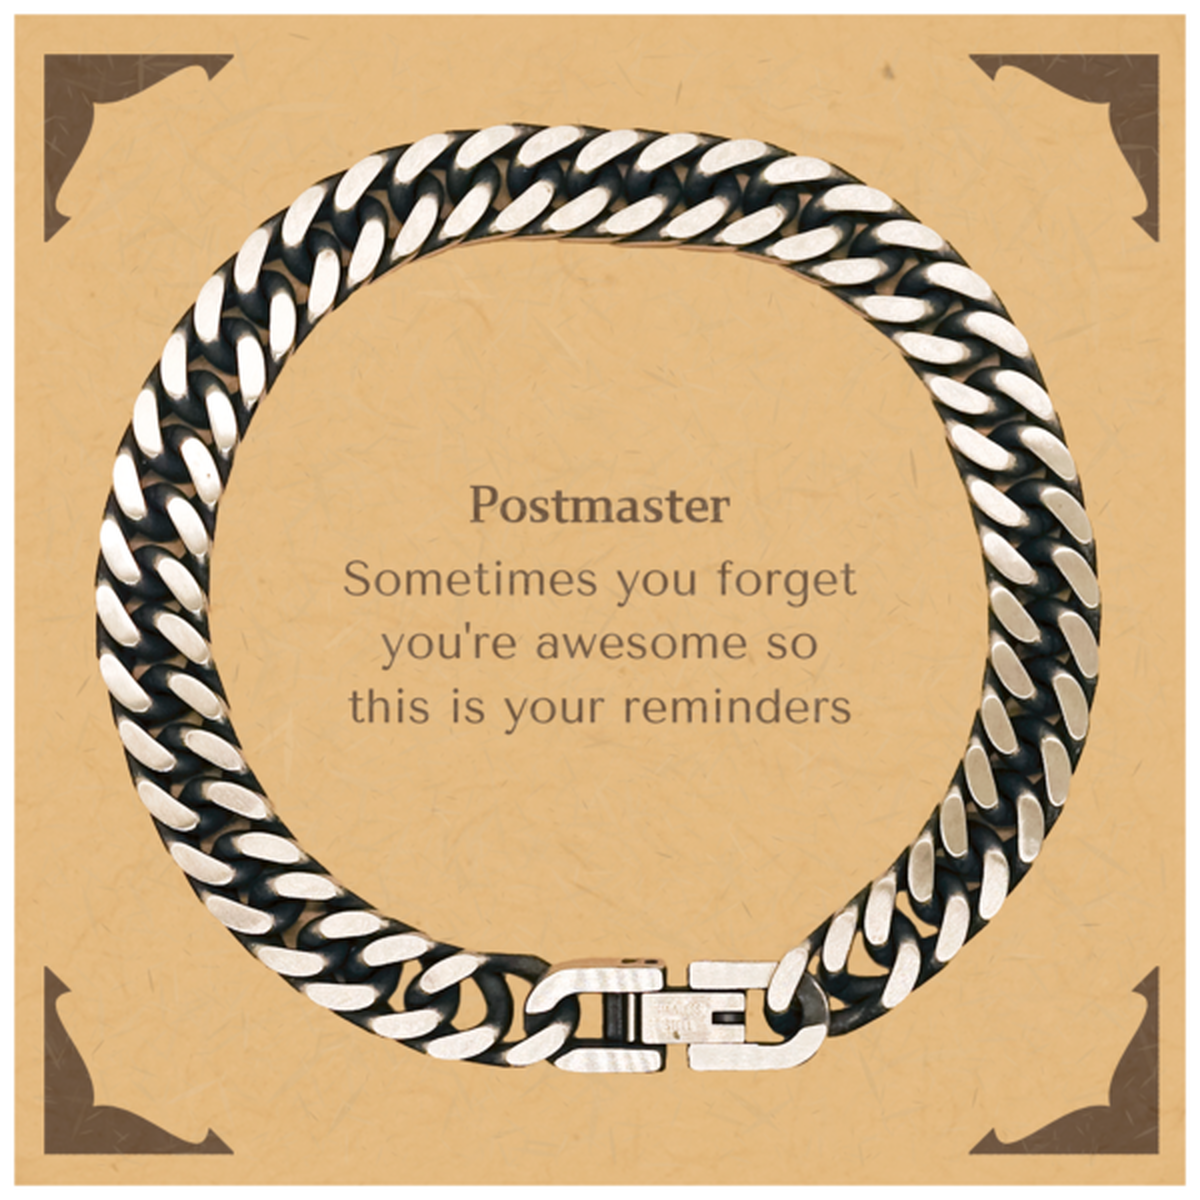 Sentimental Postmaster Cuban Link Chain Bracelet, Postmaster Sometimes you forget you're awesome so this is your reminders, Graduation Christmas Birthday Gifts for Postmaster, Men, Women, Coworkers